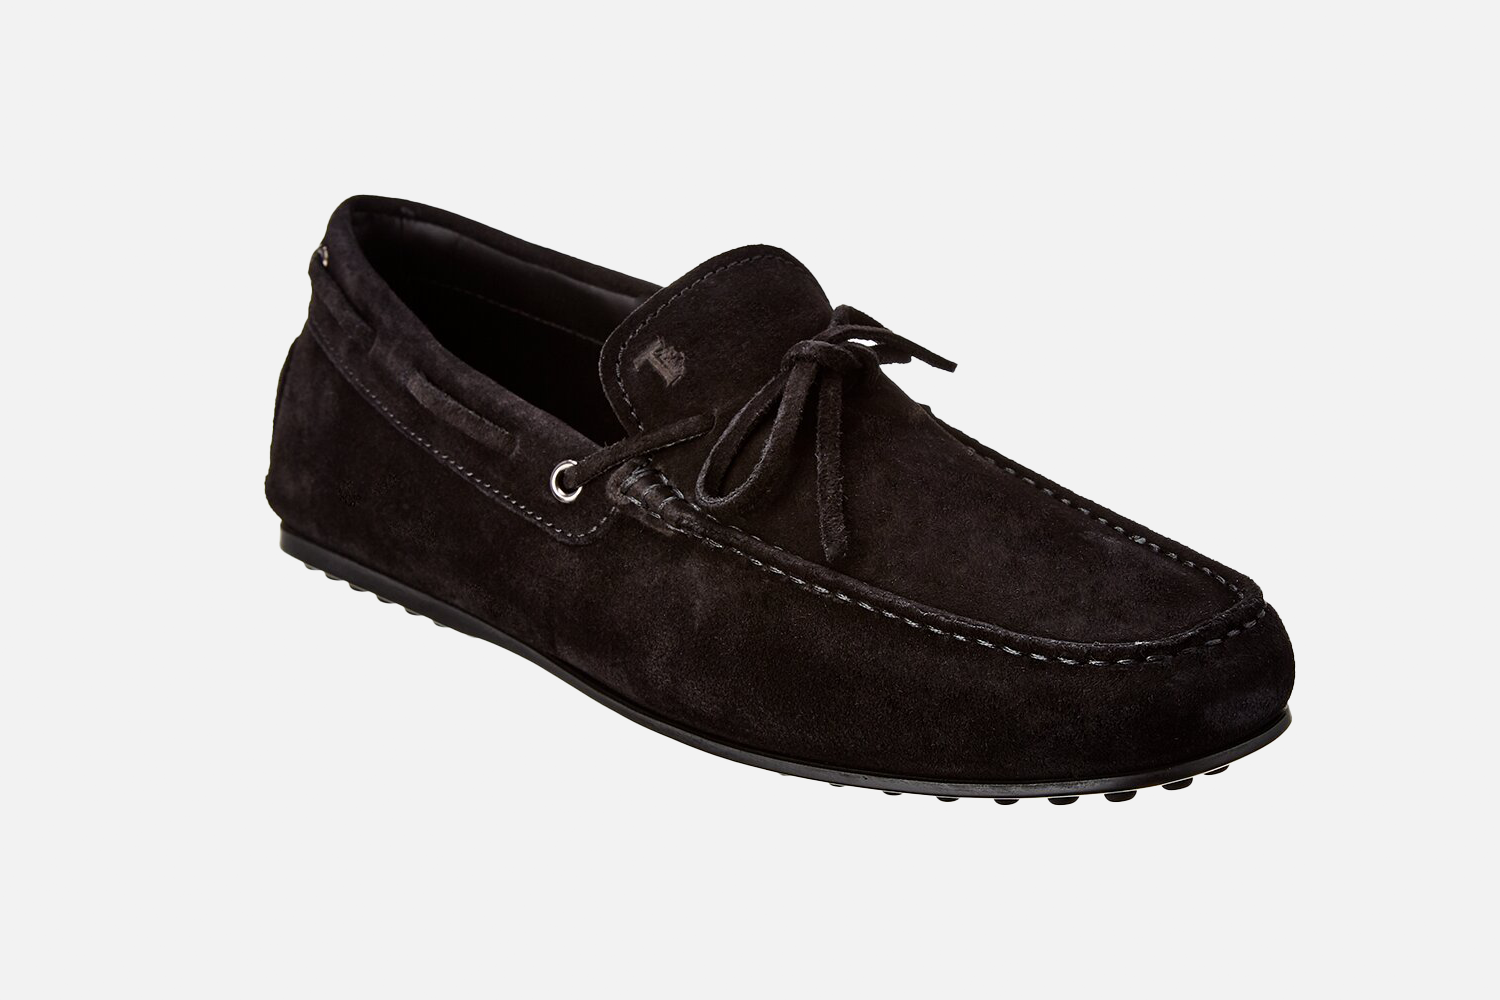 Tod's Gommino Suede Driving Shoe